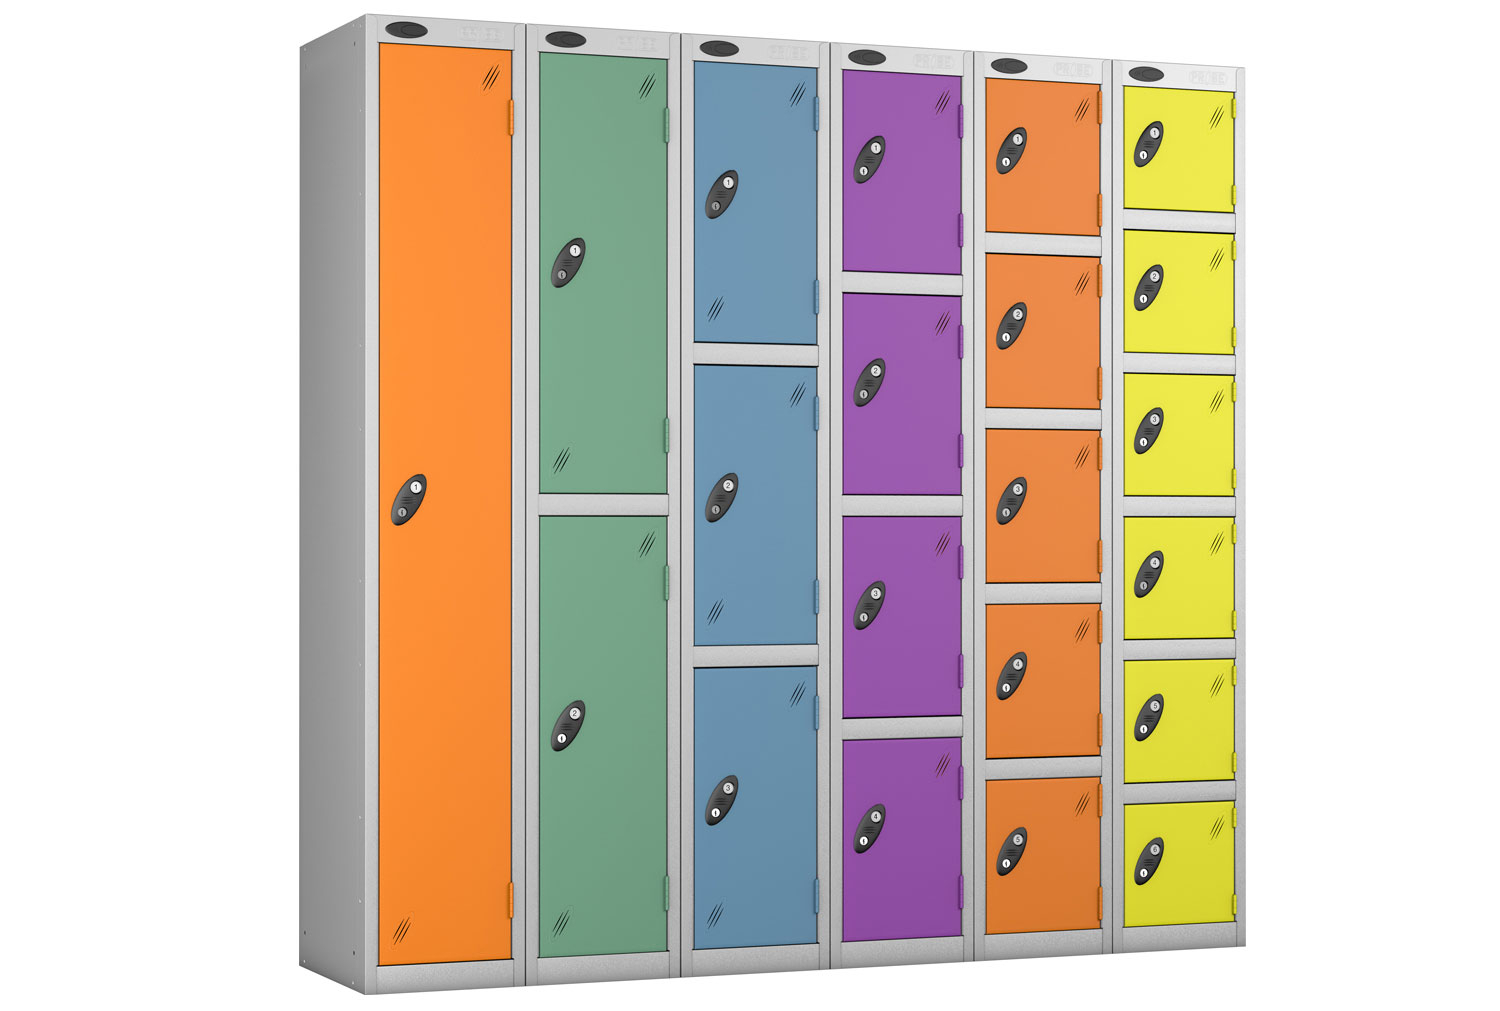 Probe Autumn Colour Lockers With Silver Body, 4 Door, 31wx46dx178h (cm), Hasp Lock, Silver Body, Lilac